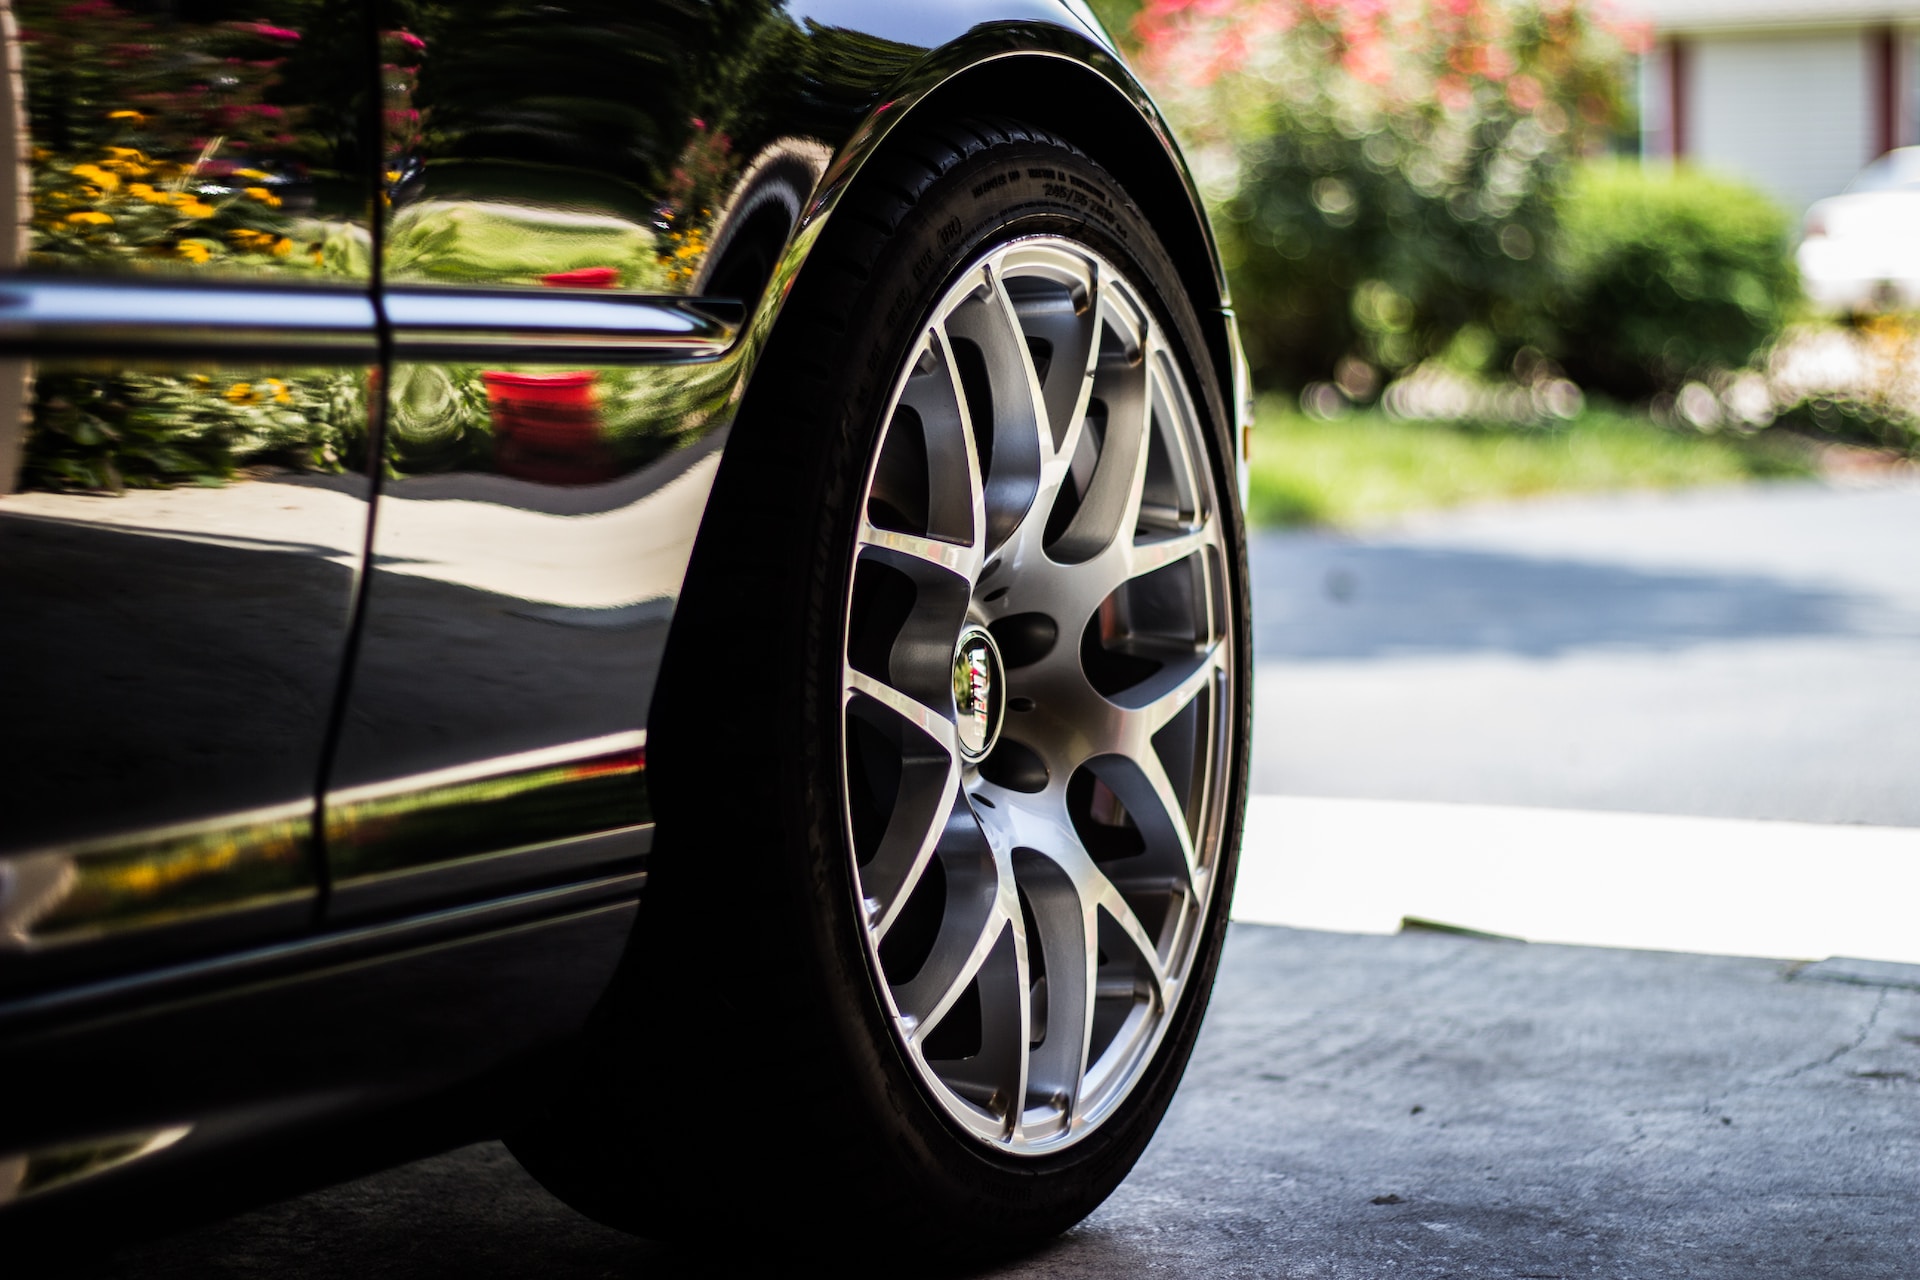 Discover How to Select the Perfect Tires for Your Car’s Performance, Safety, and Longevity